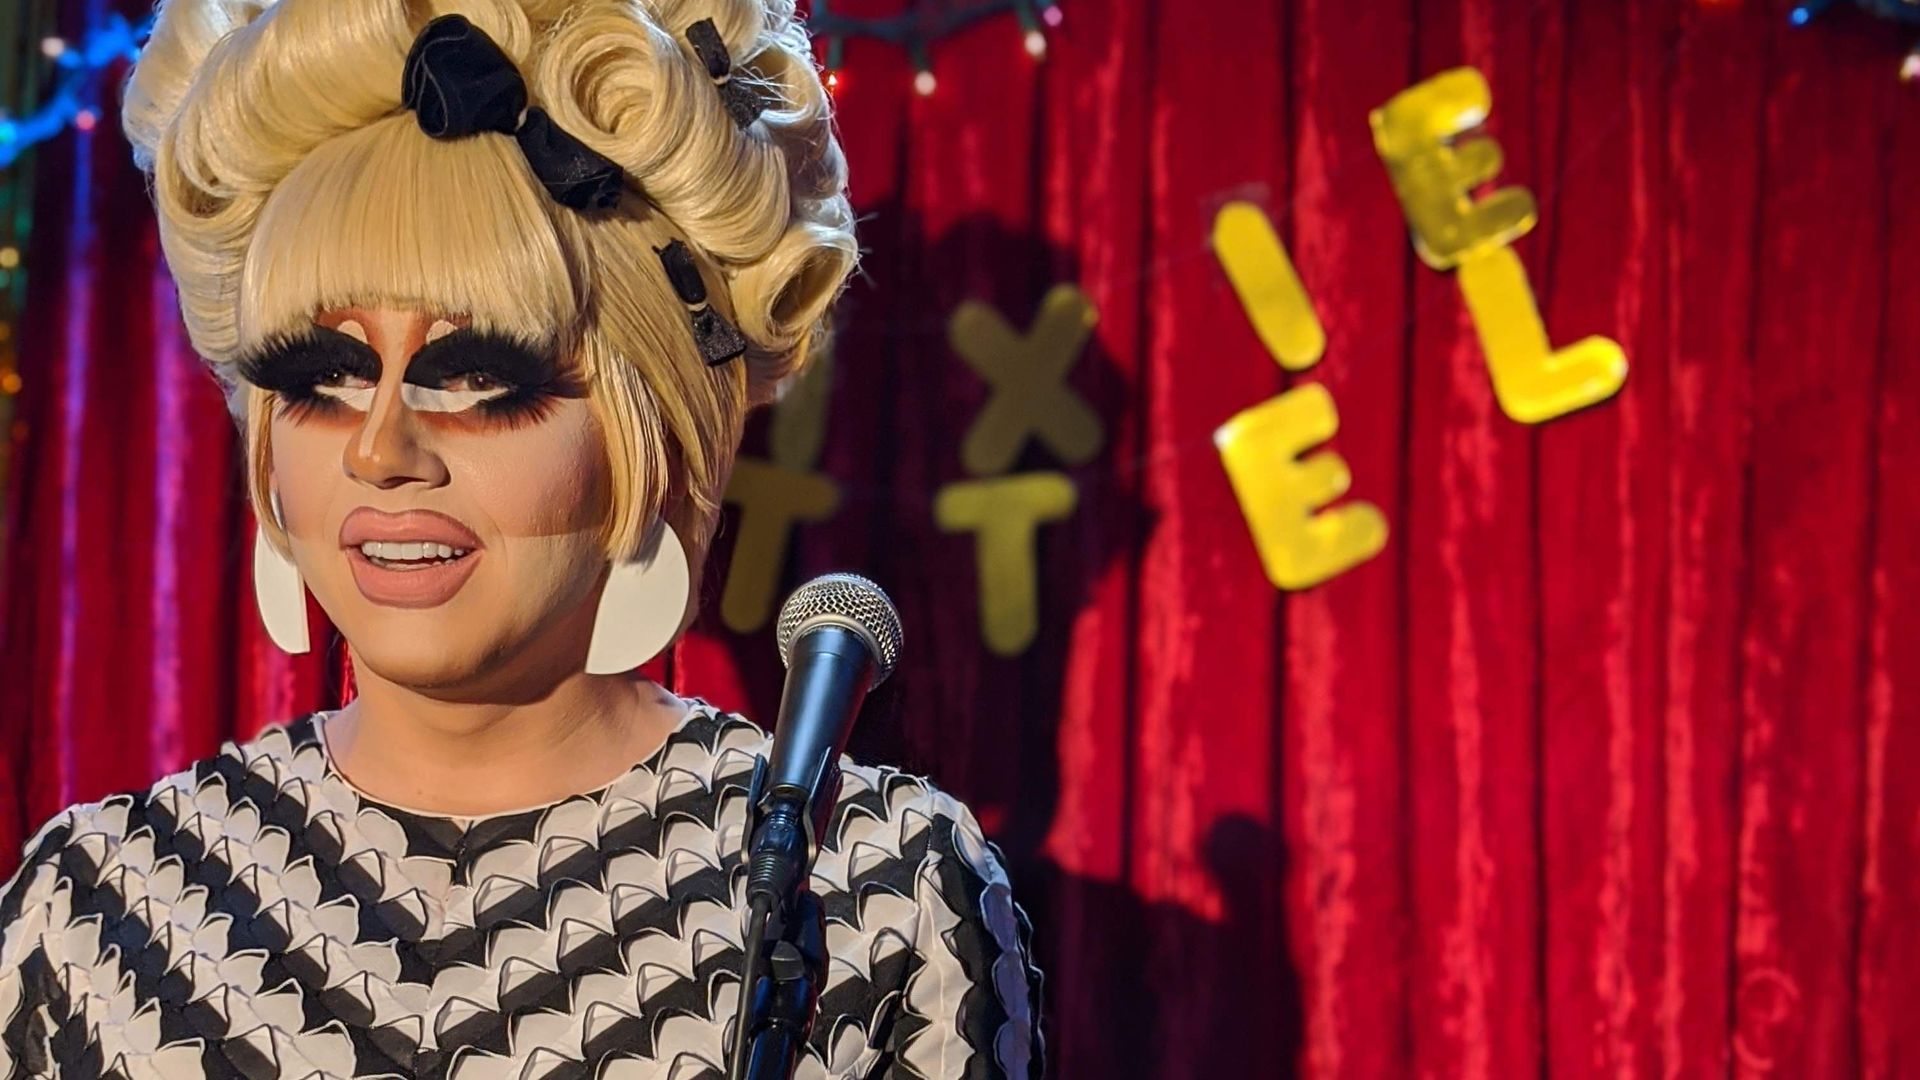 Trixie Mattel: One Night Only background